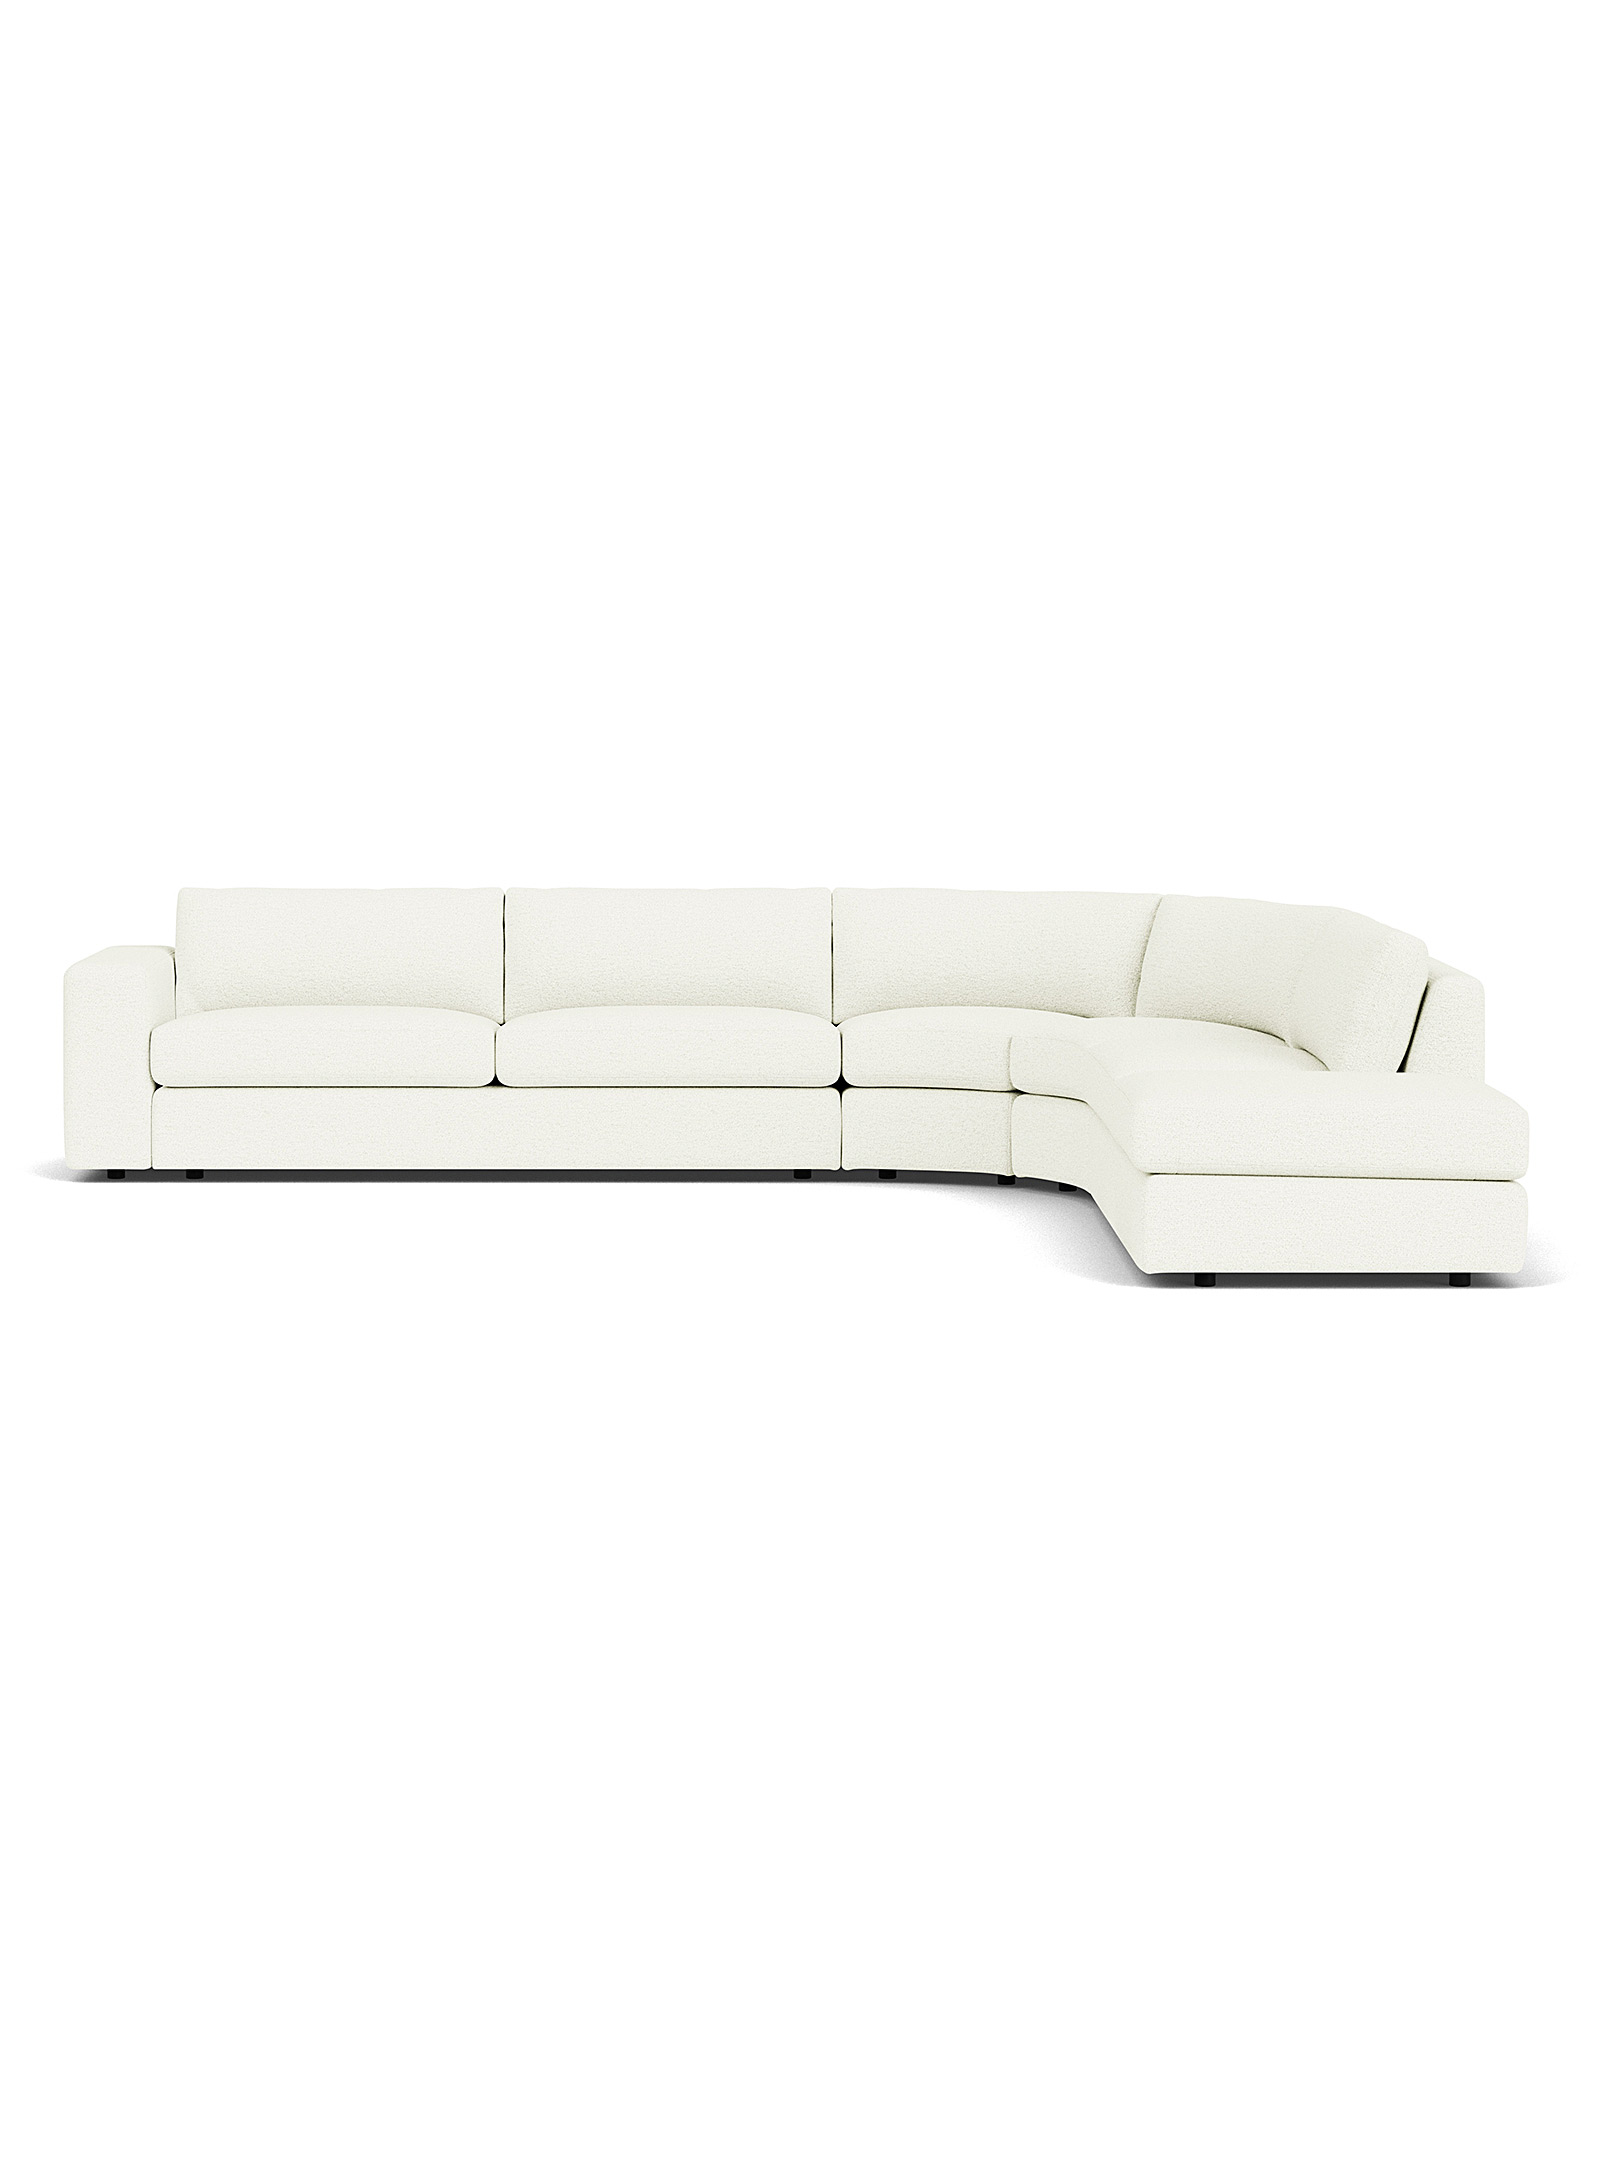 EQ3 - Everyday curved modular couch